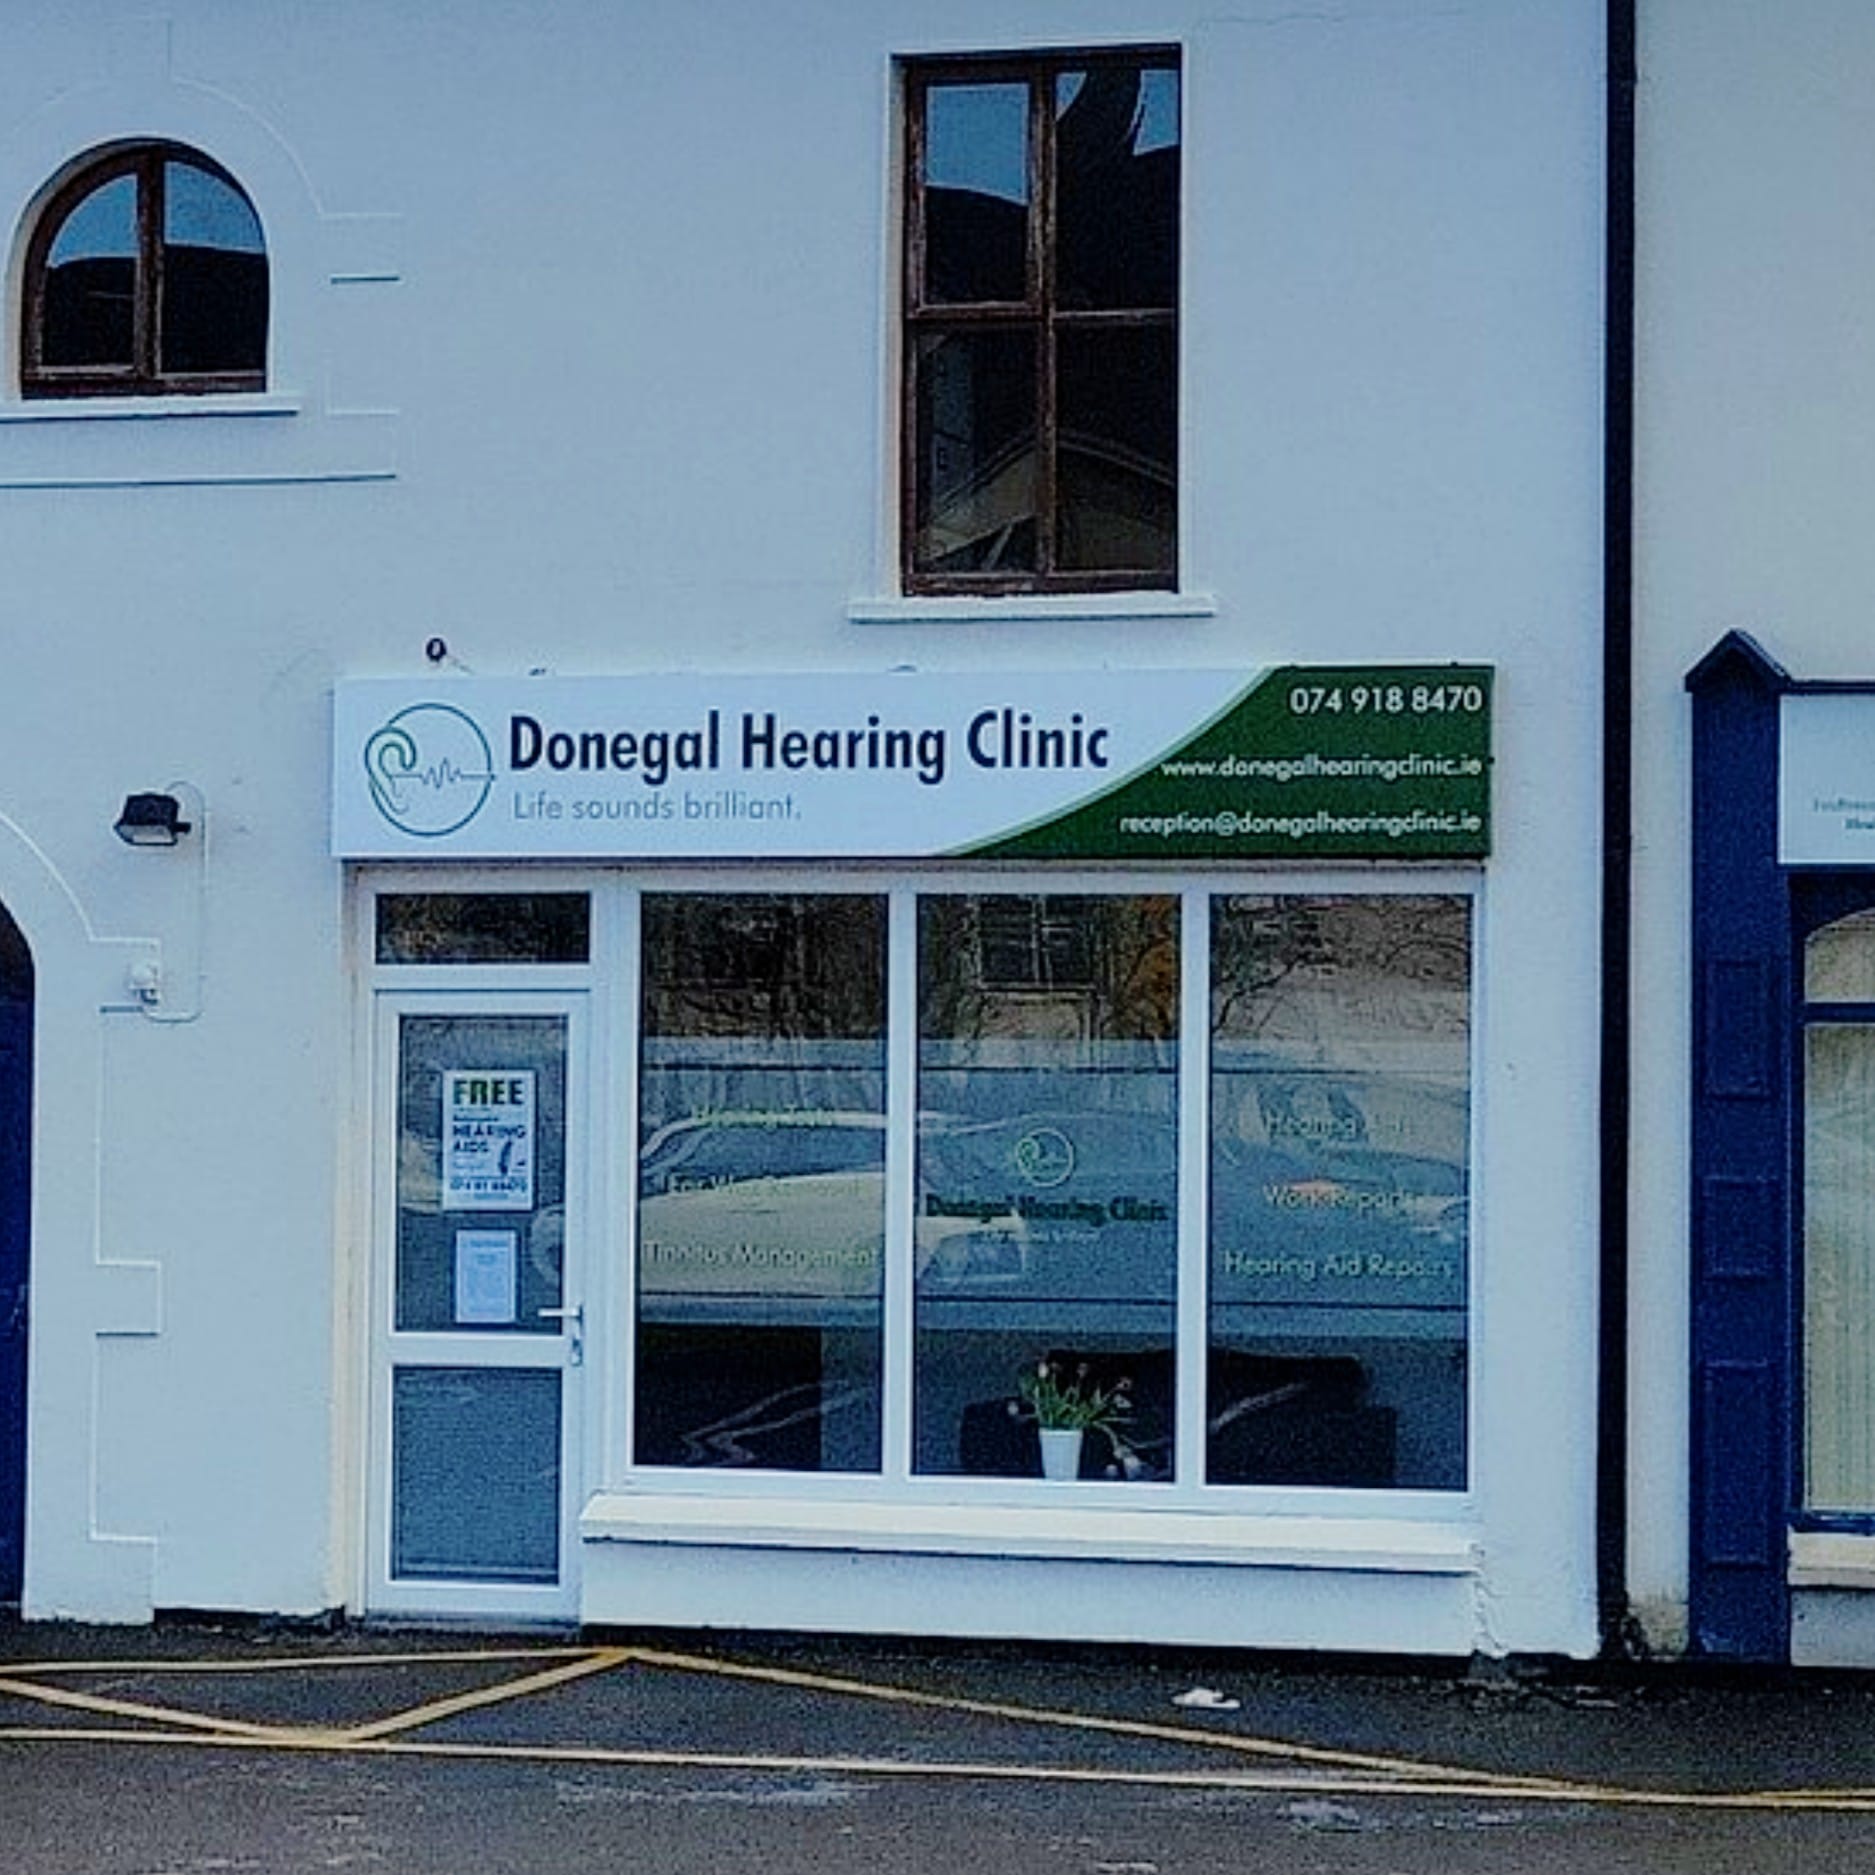 Donegal Hearing Clinic